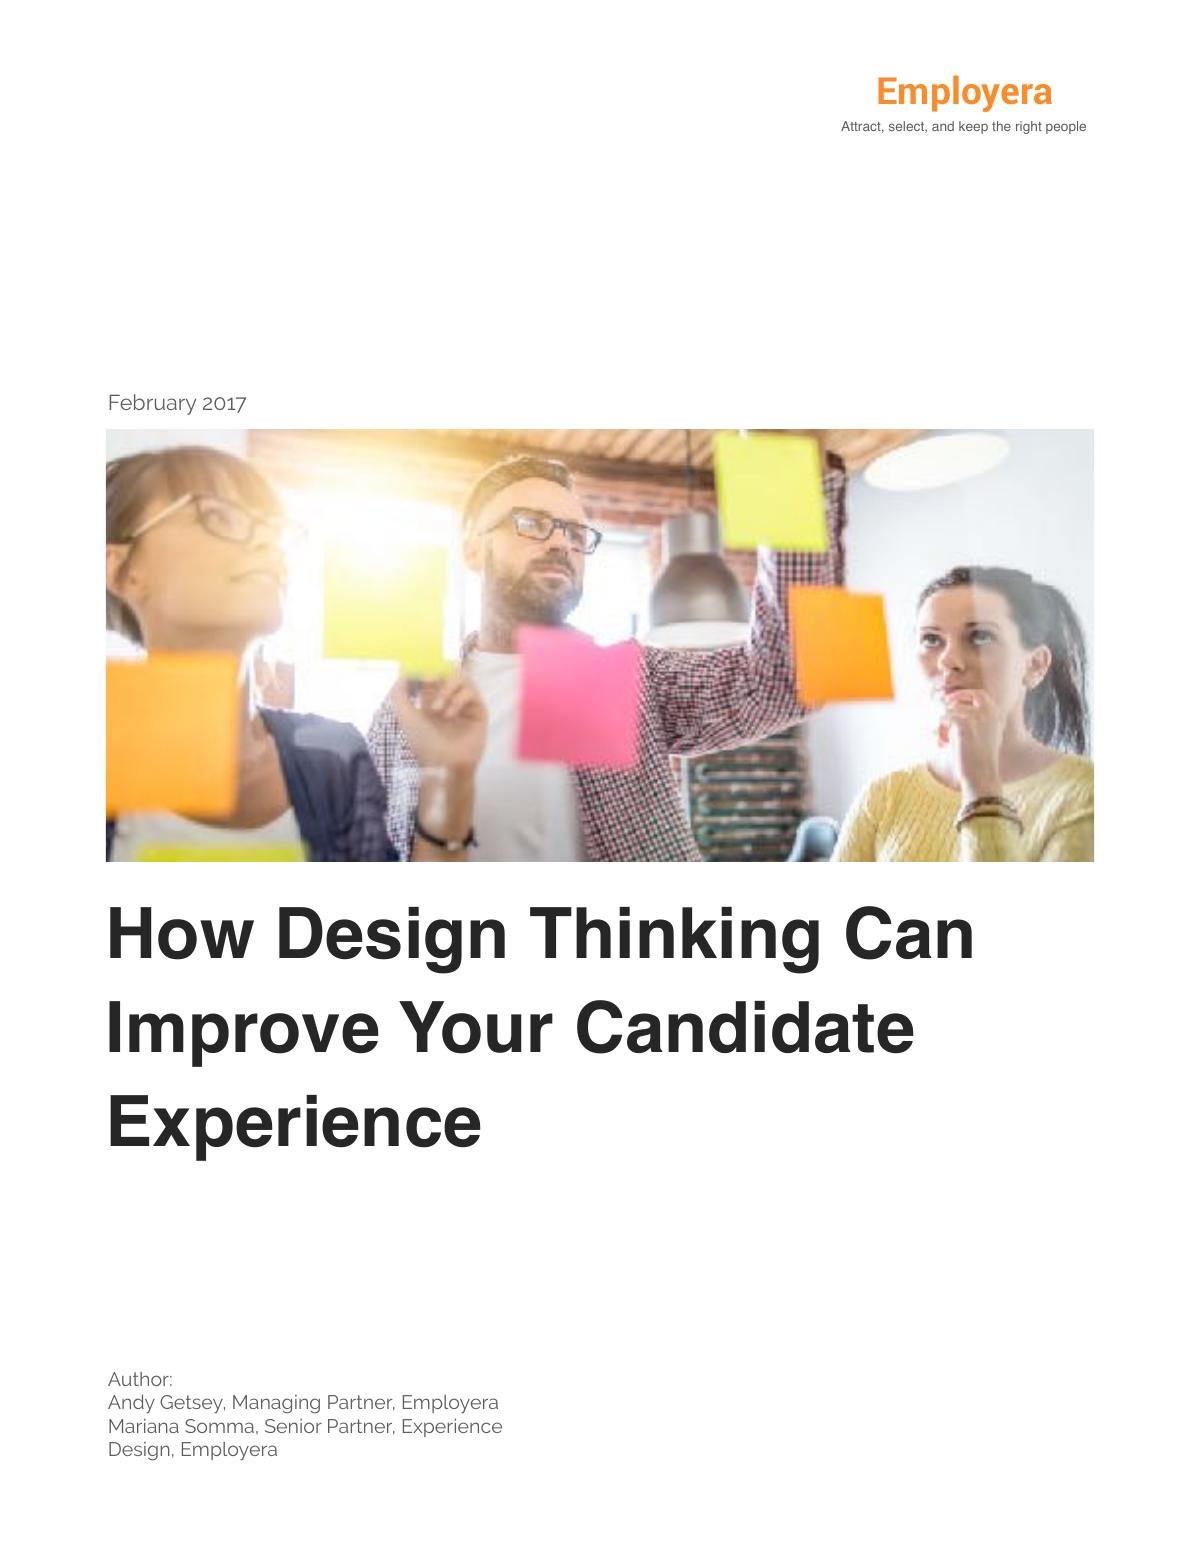 How Design Thinking Can Improve Your Candidate Experience